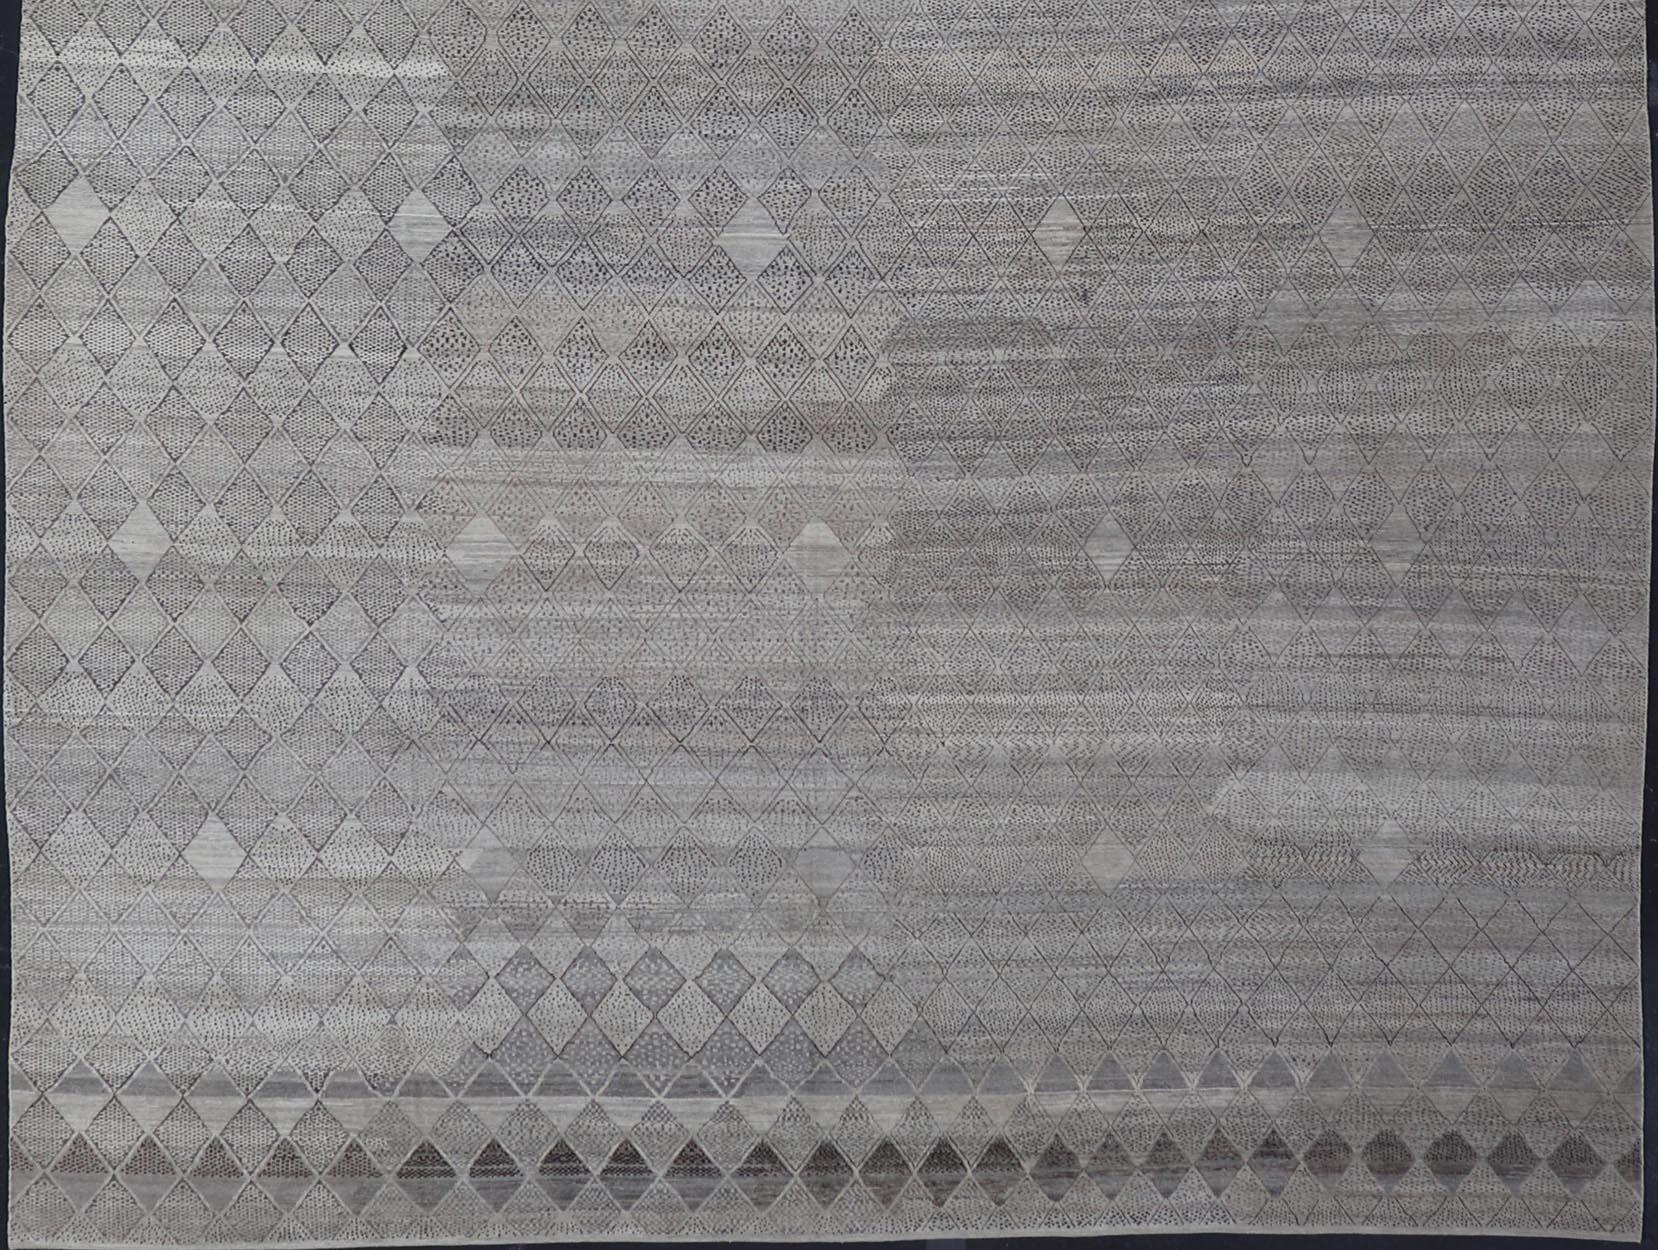 Hand-Knotted Very Large Modern Rug with Diamond Design in Gray, Taupe & Earth Tones For Sale